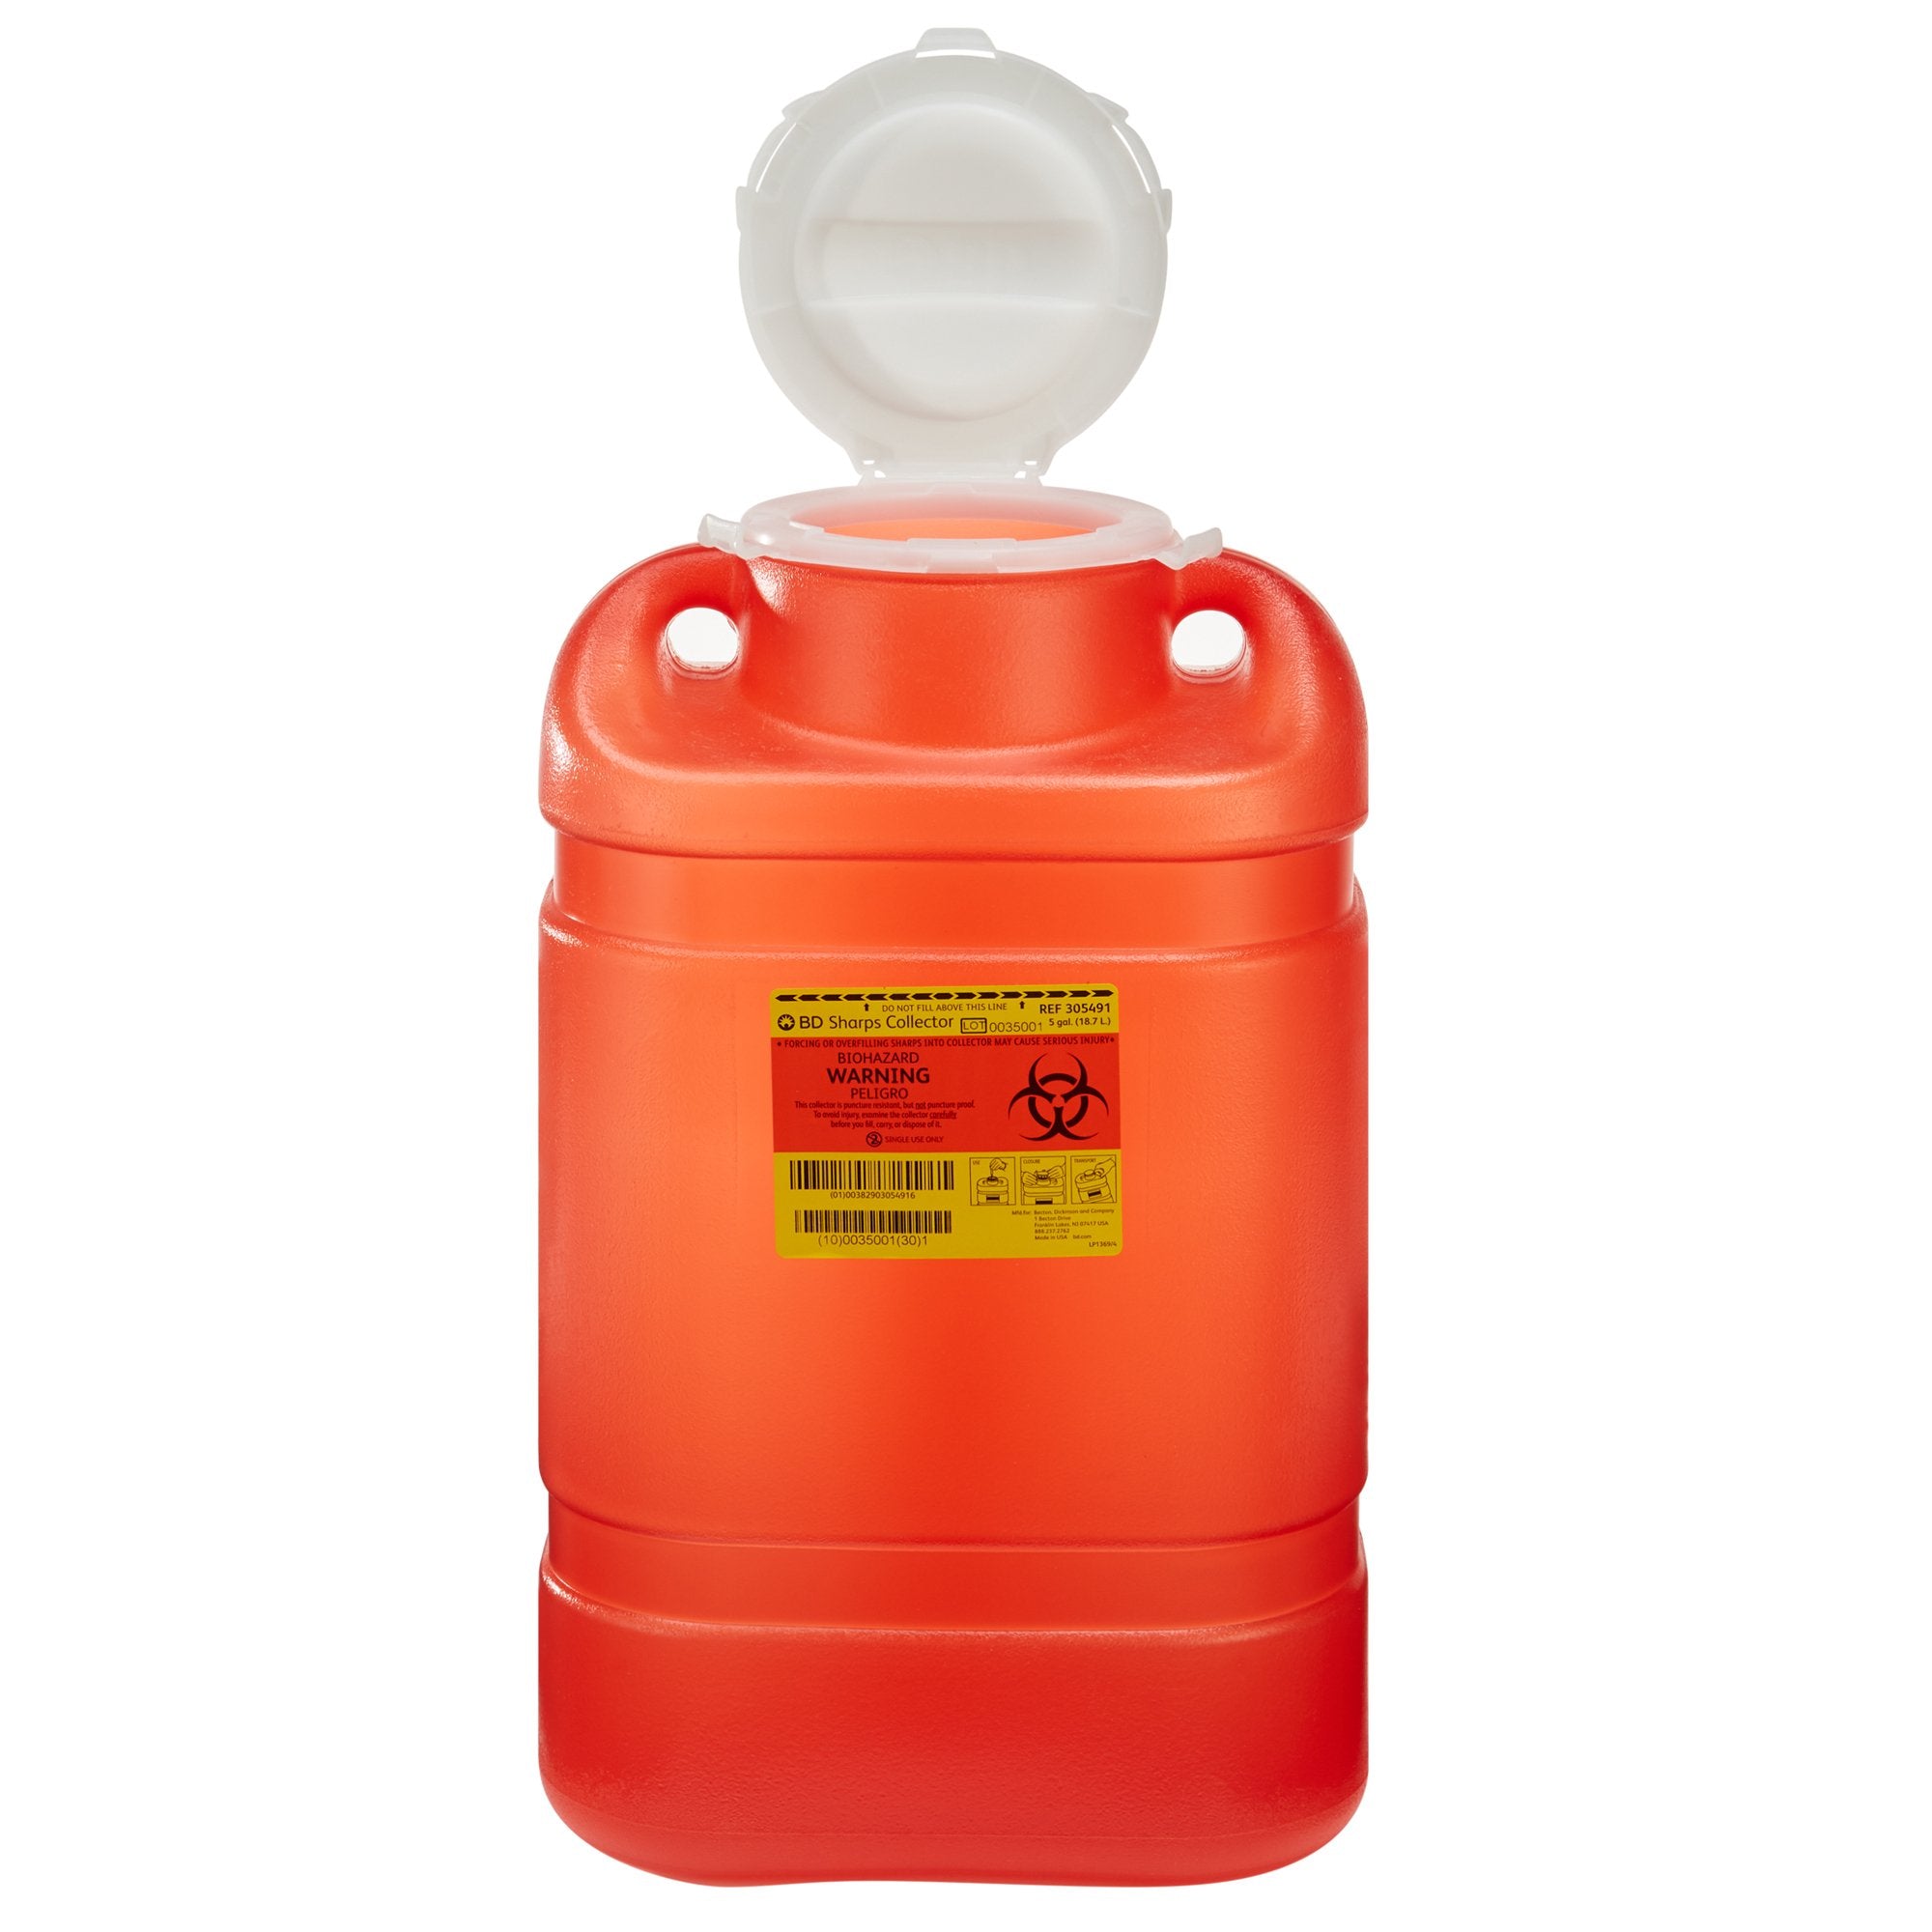 Sharps Container BD™ Red Base 18 H" x 7-1/2" w x 10-1/2" d